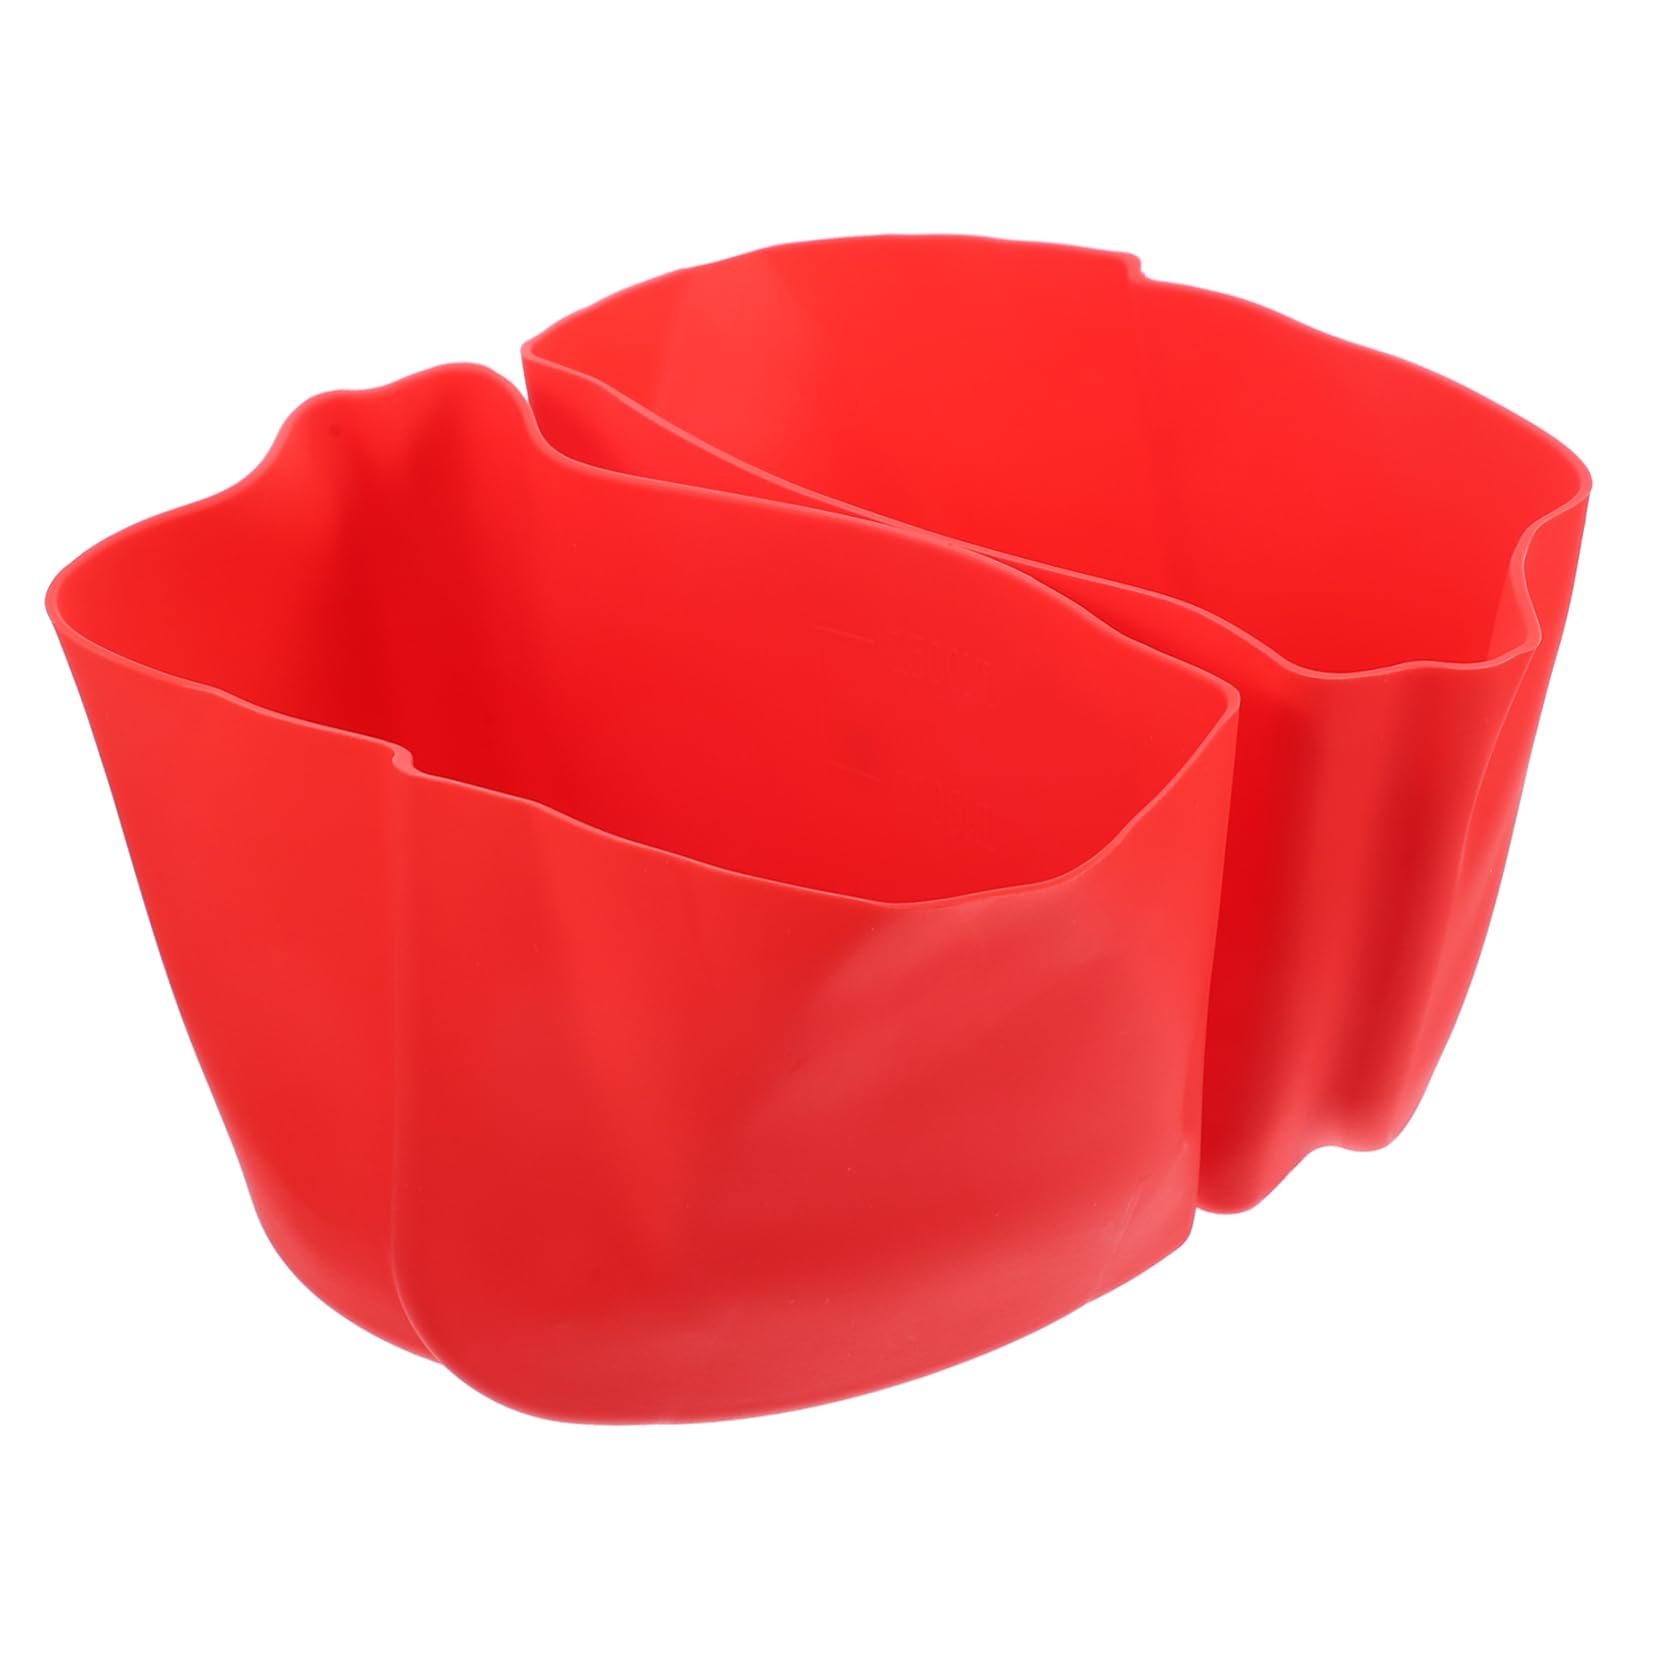 HOMSFOU 4 Sets Saucepan Silicone Lining Silicone Cookware Silicone Cooking Utensils Red Rice Cooker Multi-use Cooker Divider Slow Cooker Insert Kitchen Supplies Non-slip